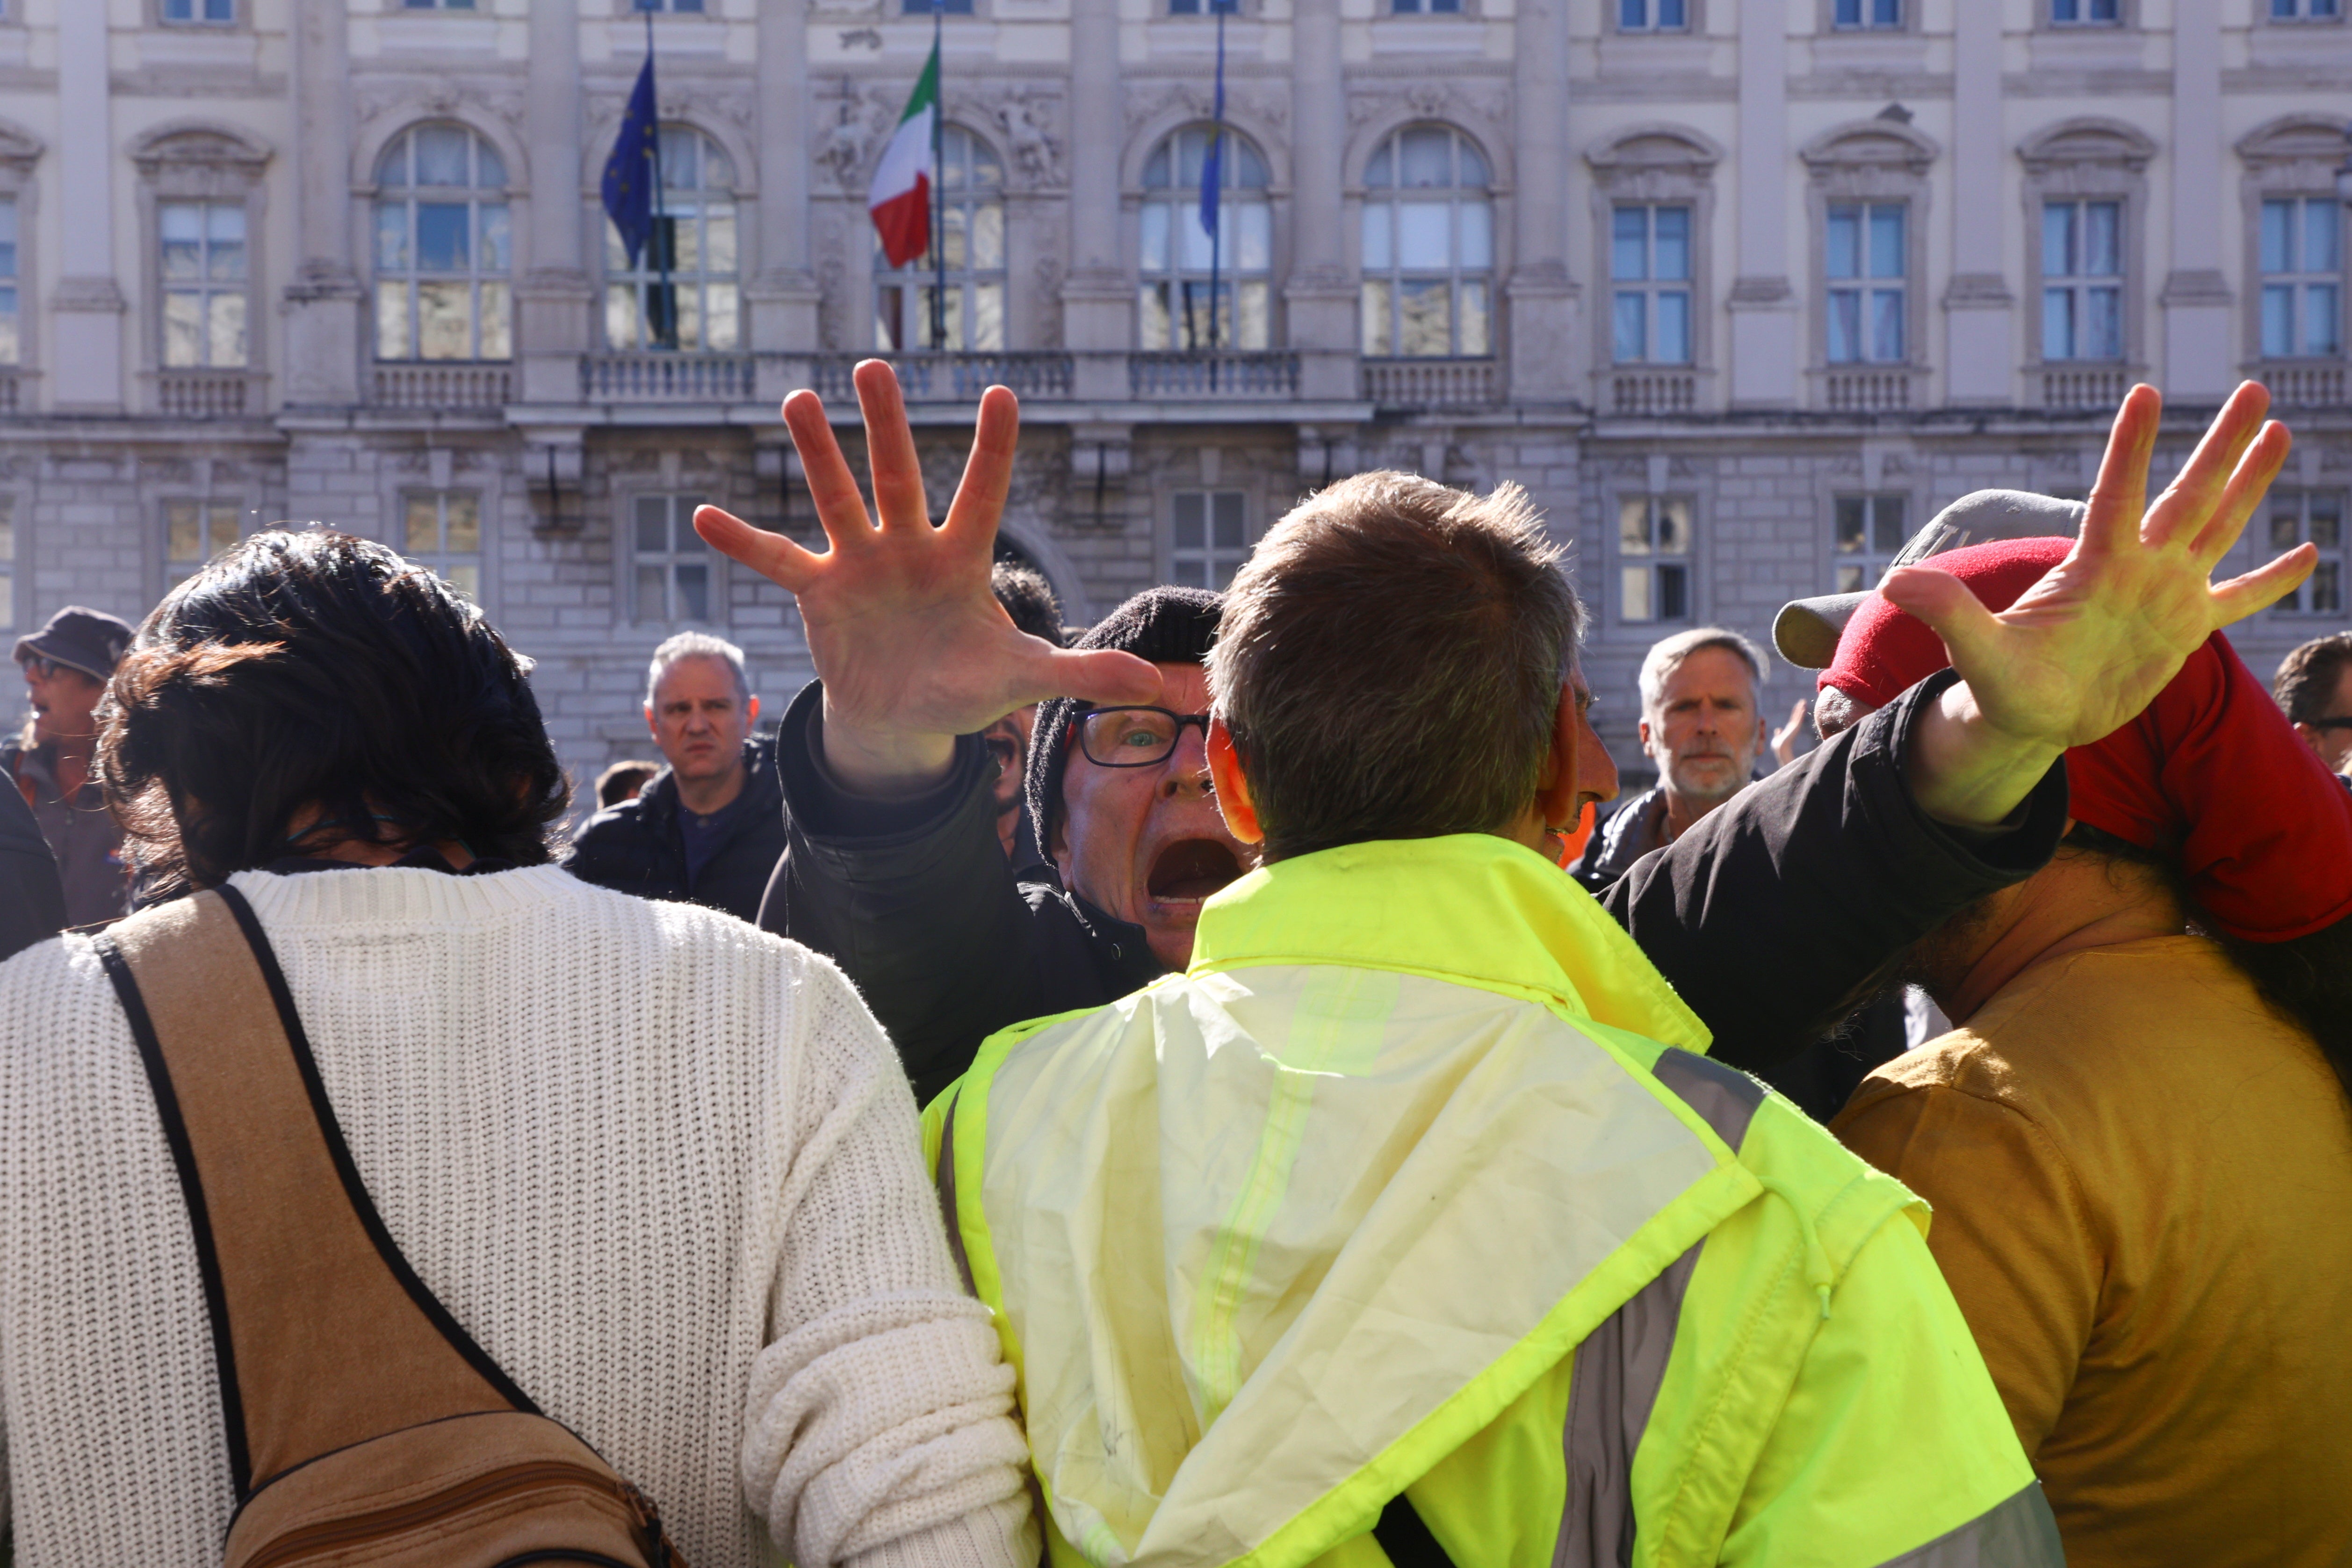 People demonstrate against Covid measures in central Trieste. The impact of the pandemic has been cited as a reason for cuts to the mental health system in the region